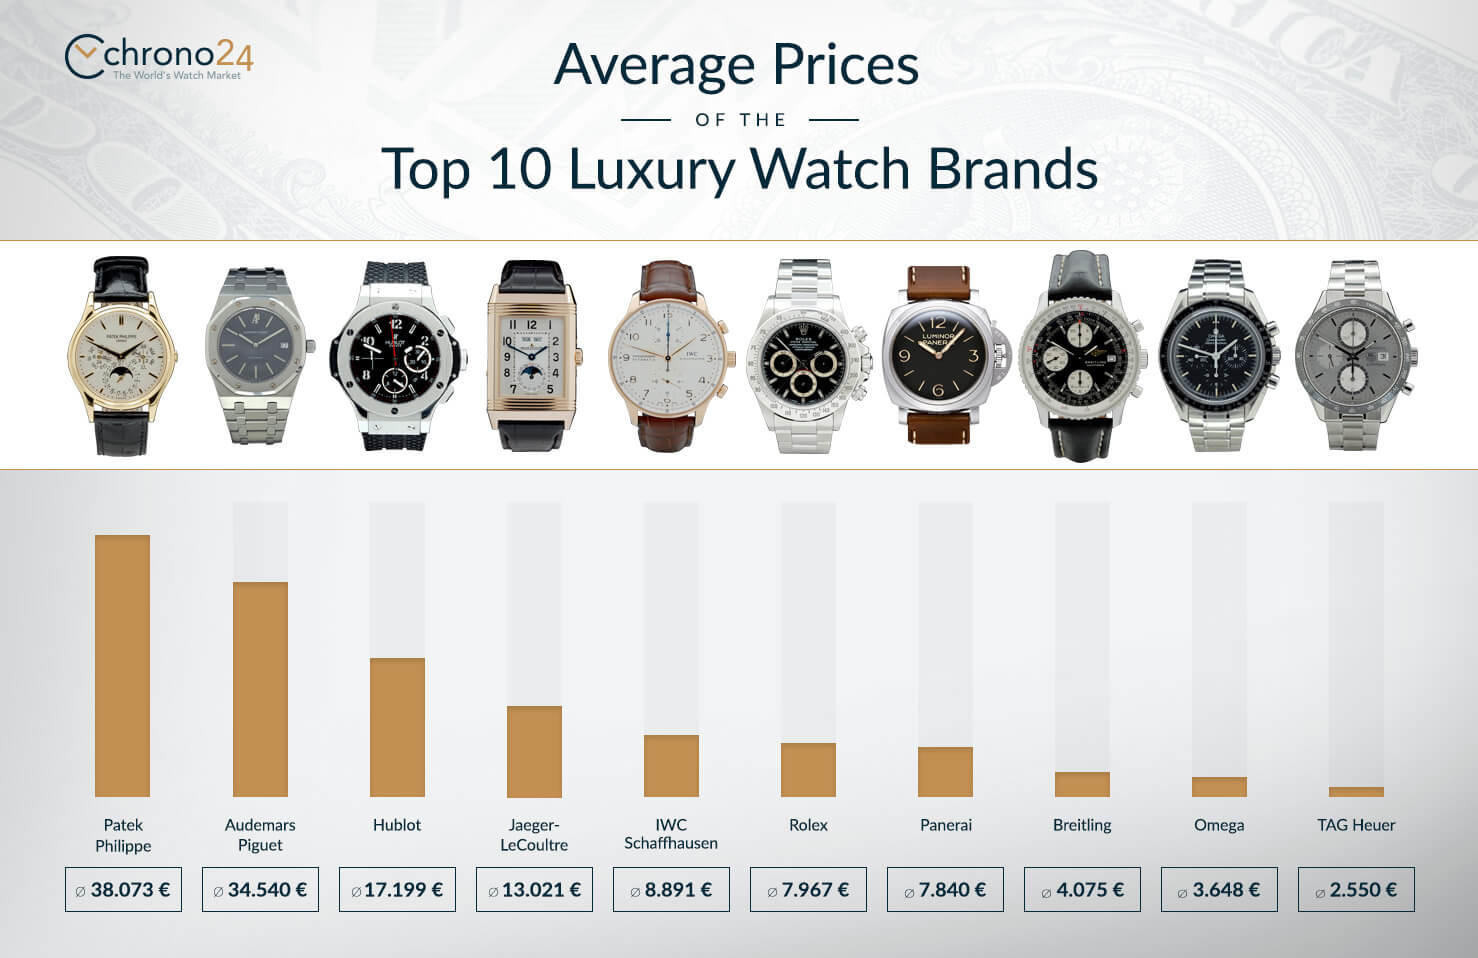 average prices of the top 10 luxury watch brands by Chrono24